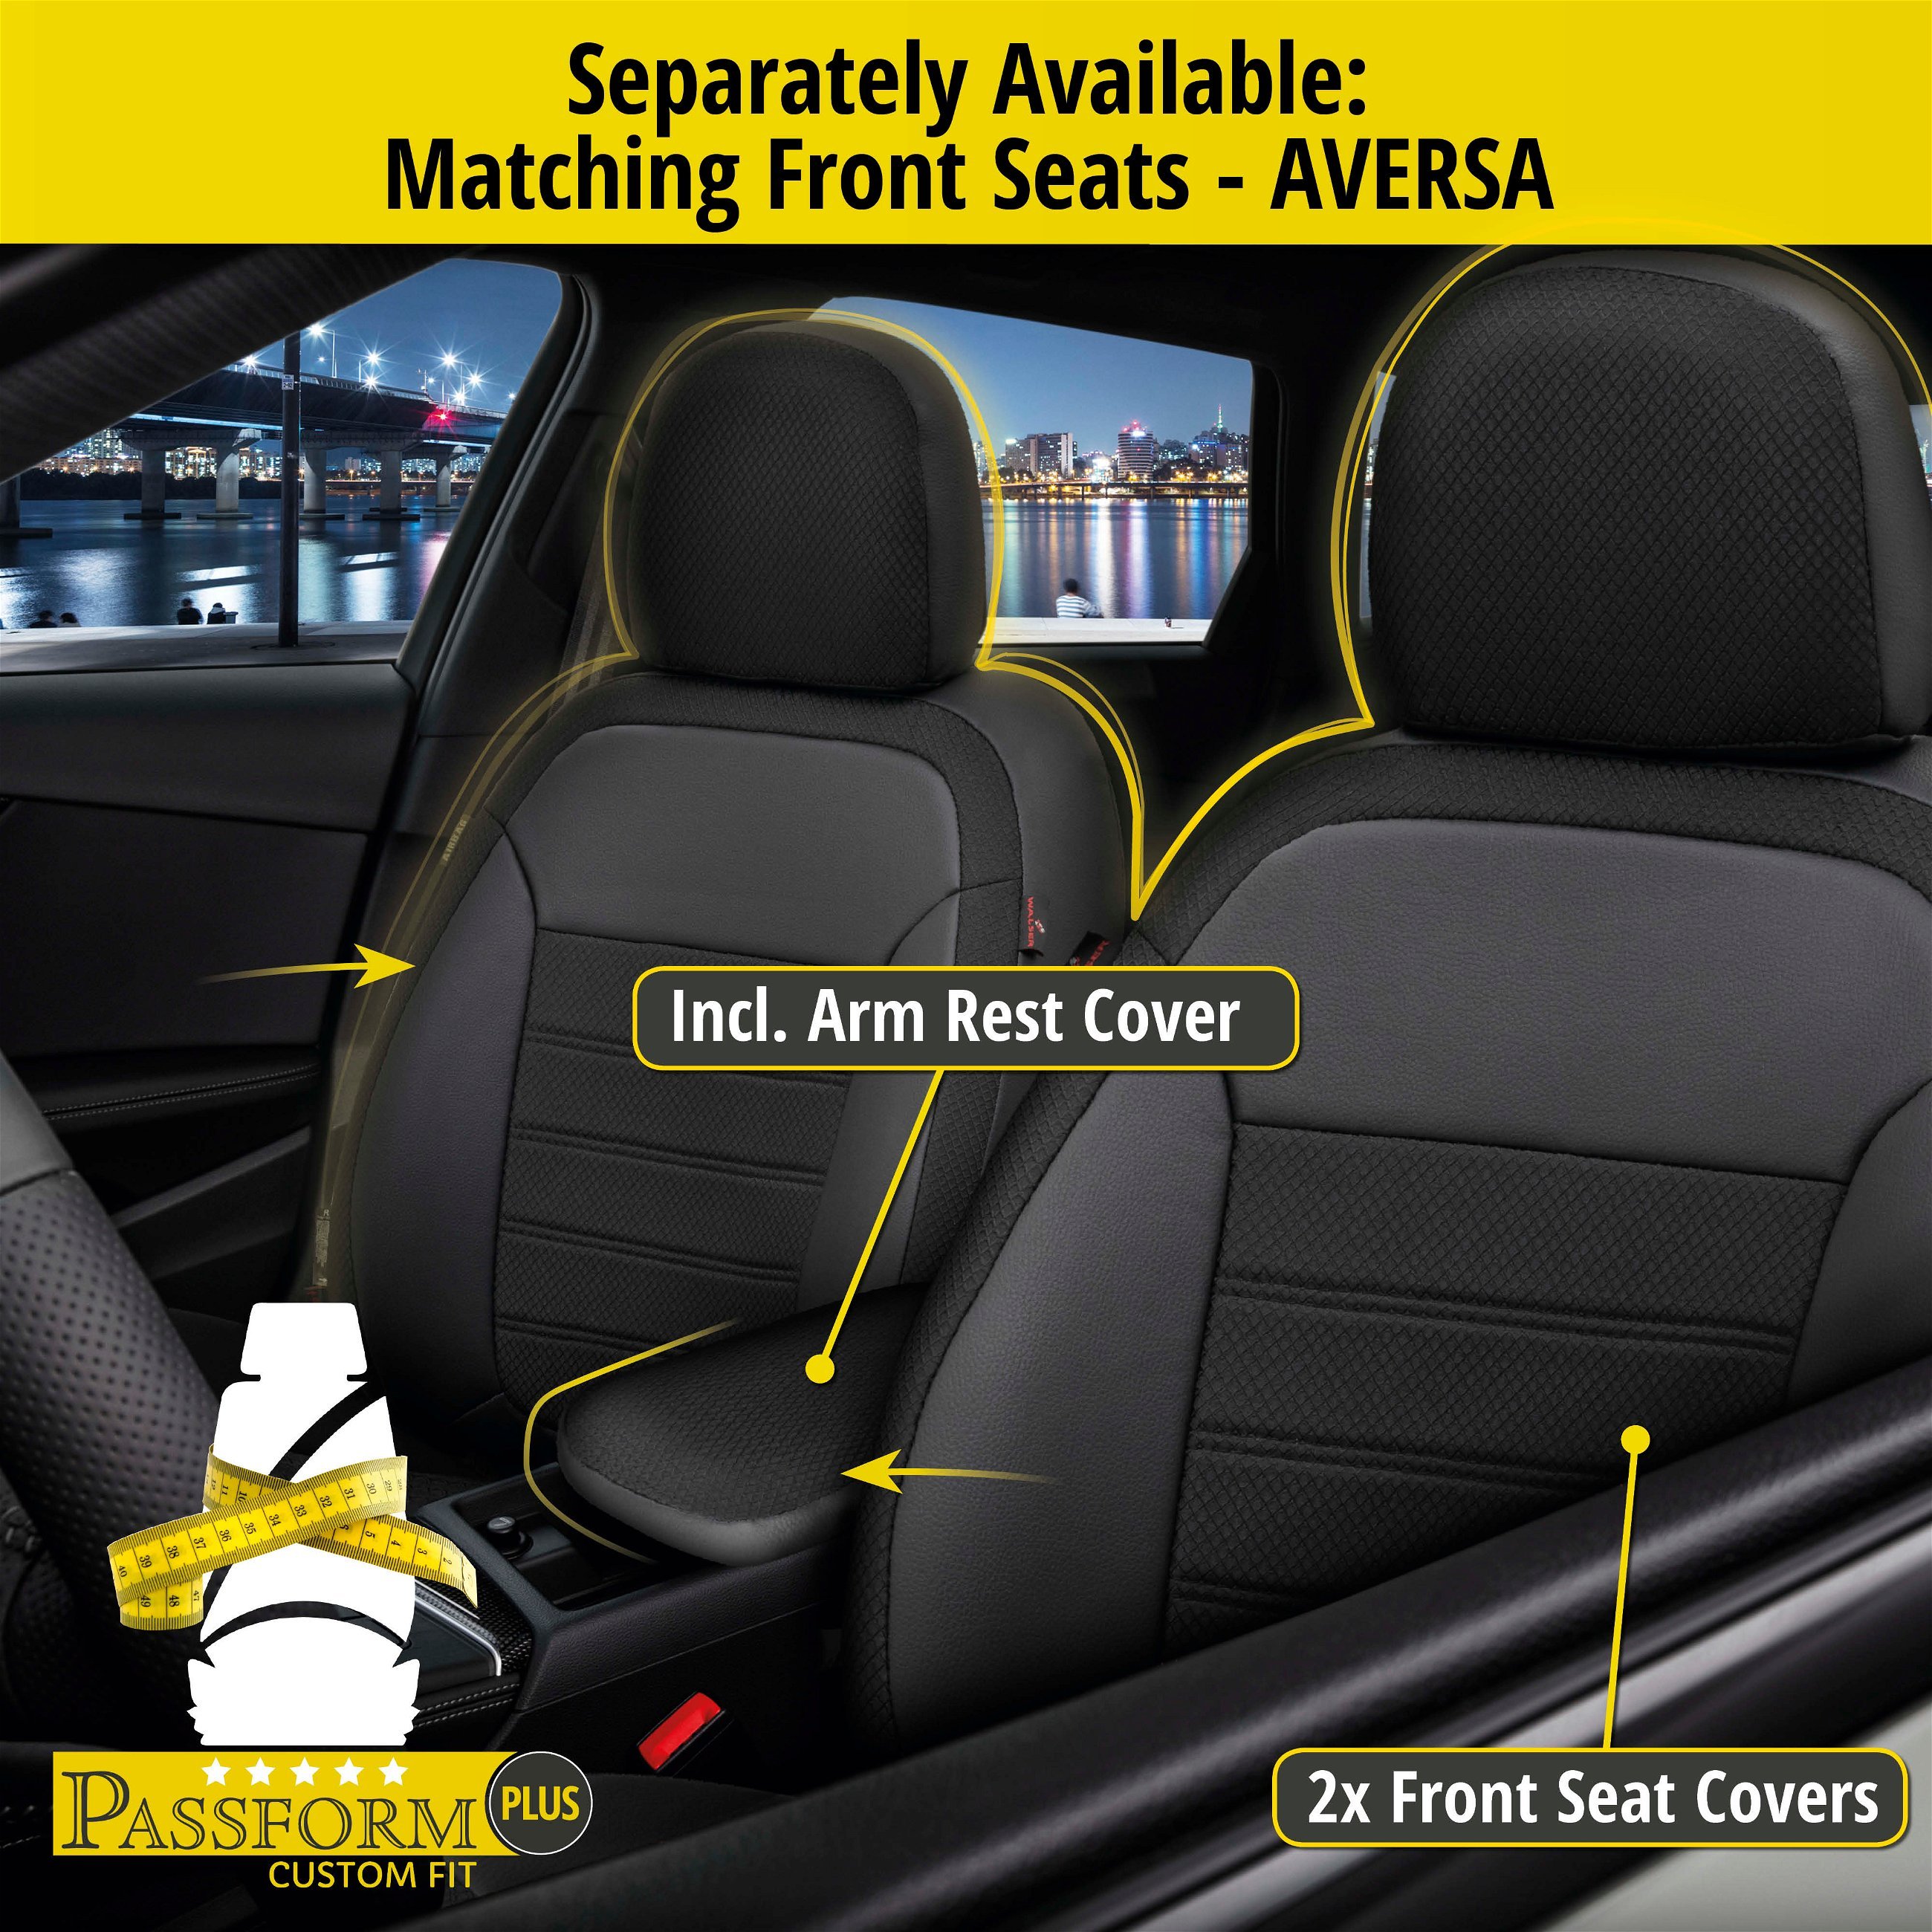 Seat Cover Aversa for Skoda Octavia III Combi (5E5) 11/2012-Today, 1 rear seat cover for normal seats